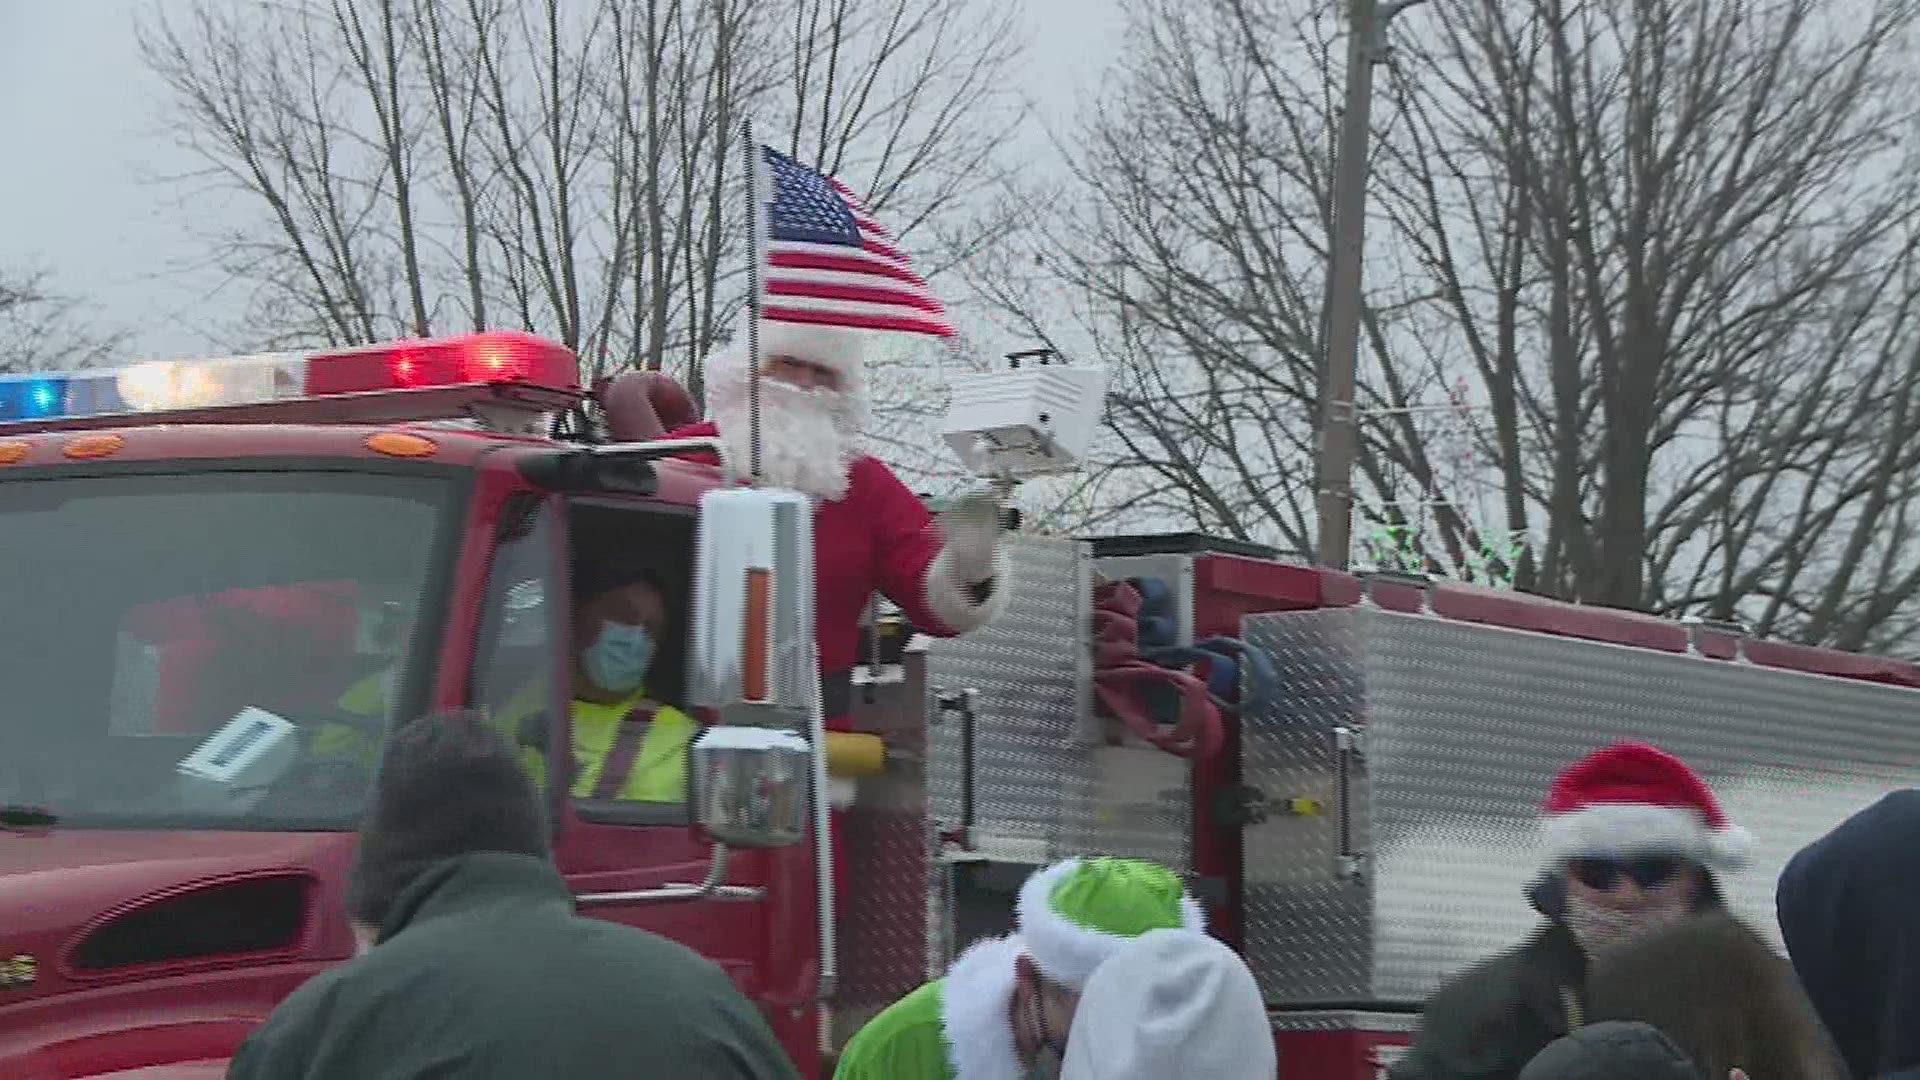 The Matherville Fire Department and Community Club put on the parade after Covid-19 cancelled their usual meet-and-greet.